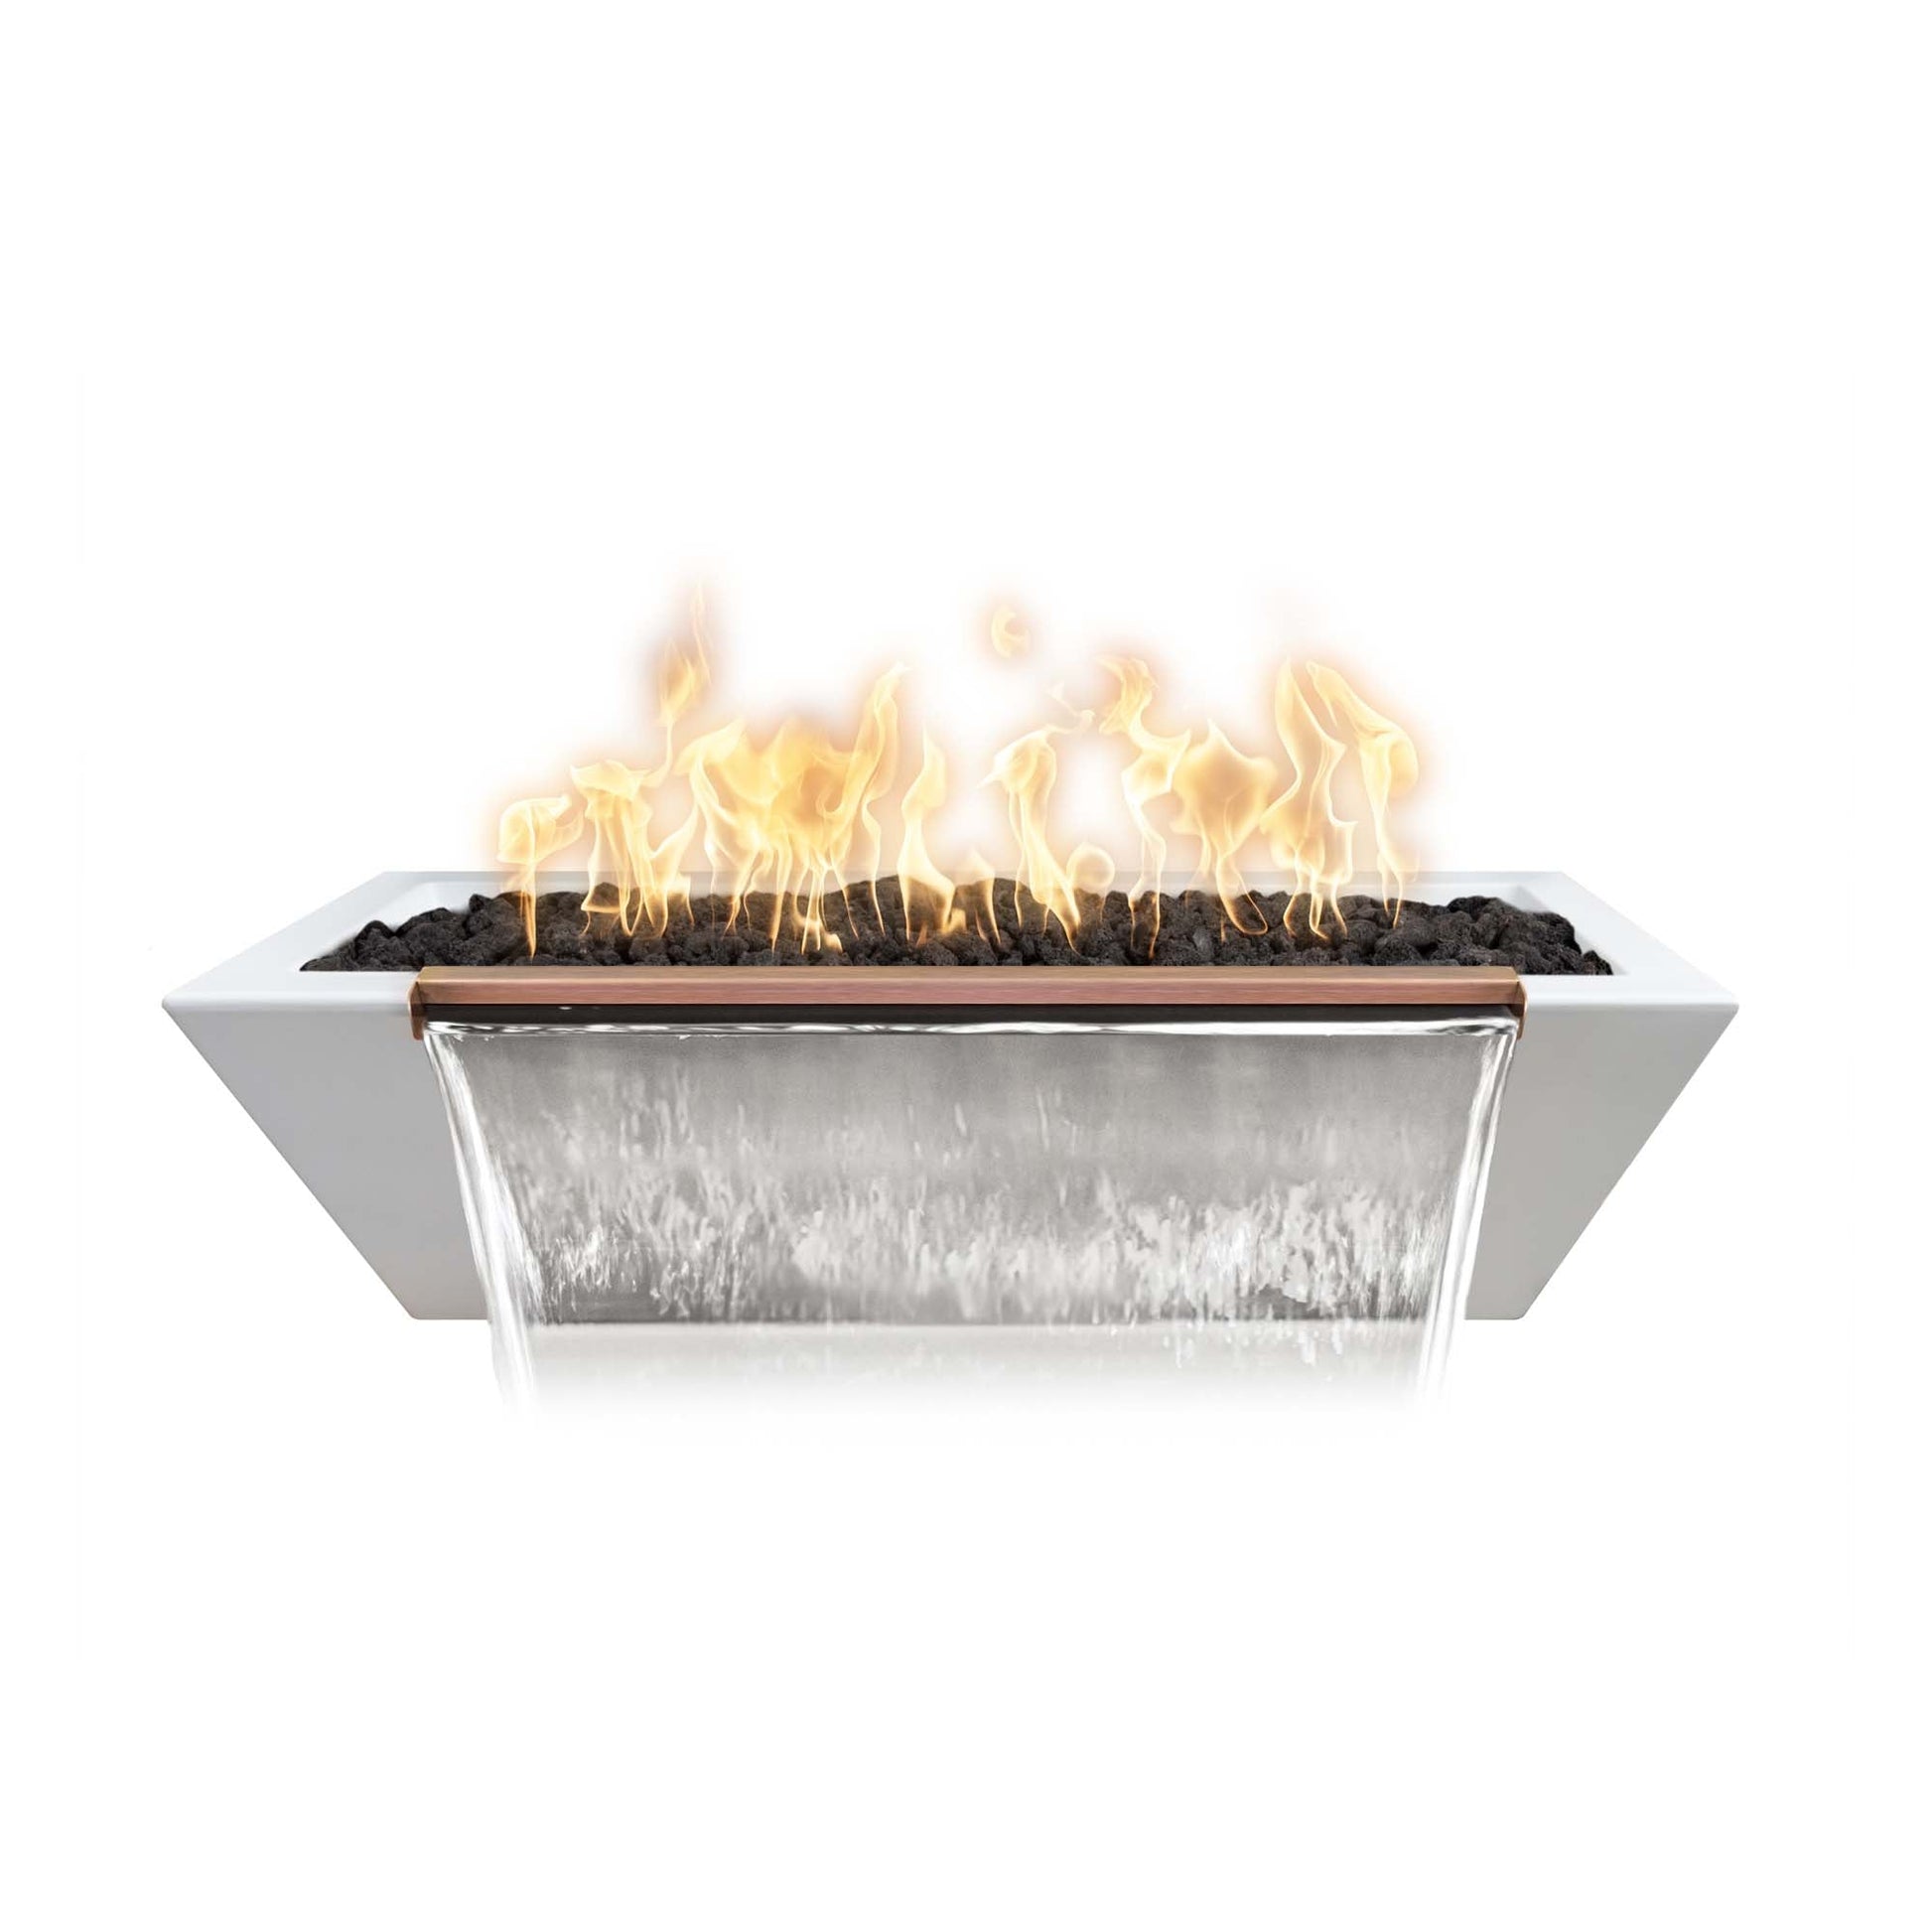 The Outdoor Plus Linear Maya 72" Chestnut GFRC Concrete Liquid Propane Fire & Water Bowl with Match Lit with Flame Sense Ignition